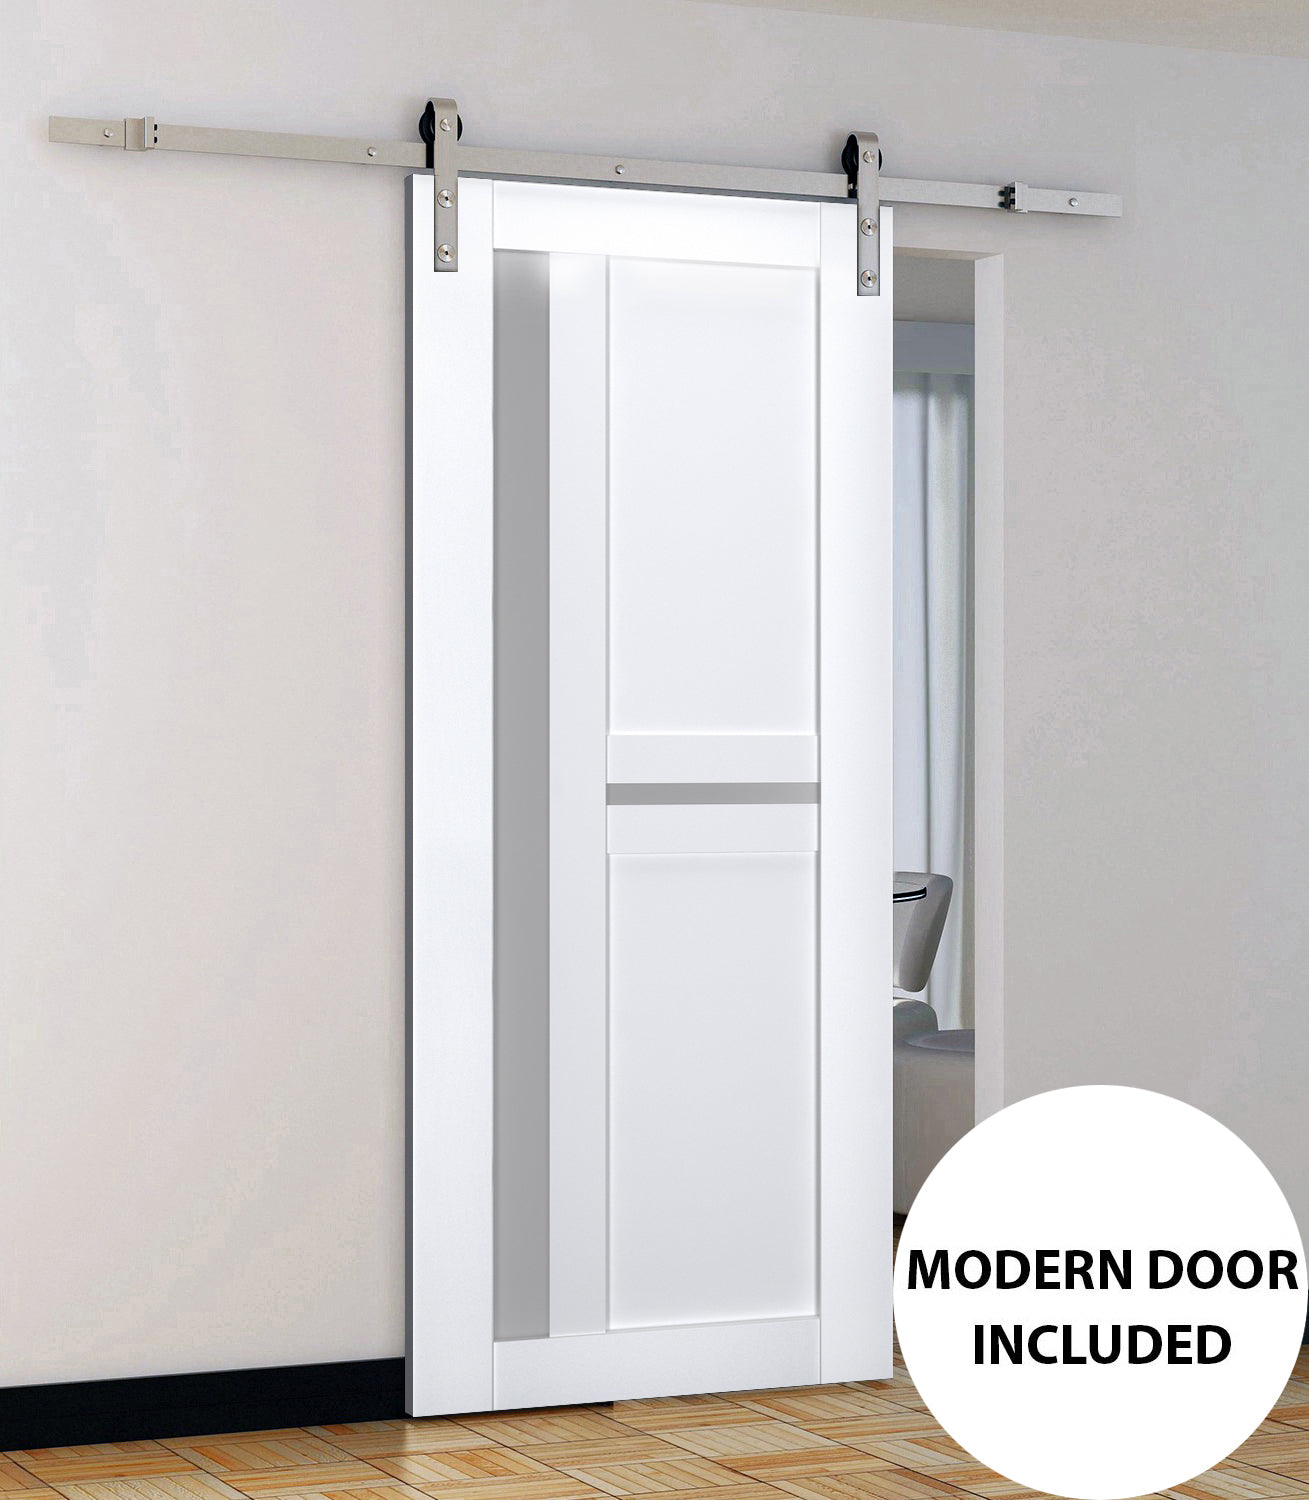 Veregio 7288 Matte White Barn Door with Frosted Glass and Silver Finish Rail